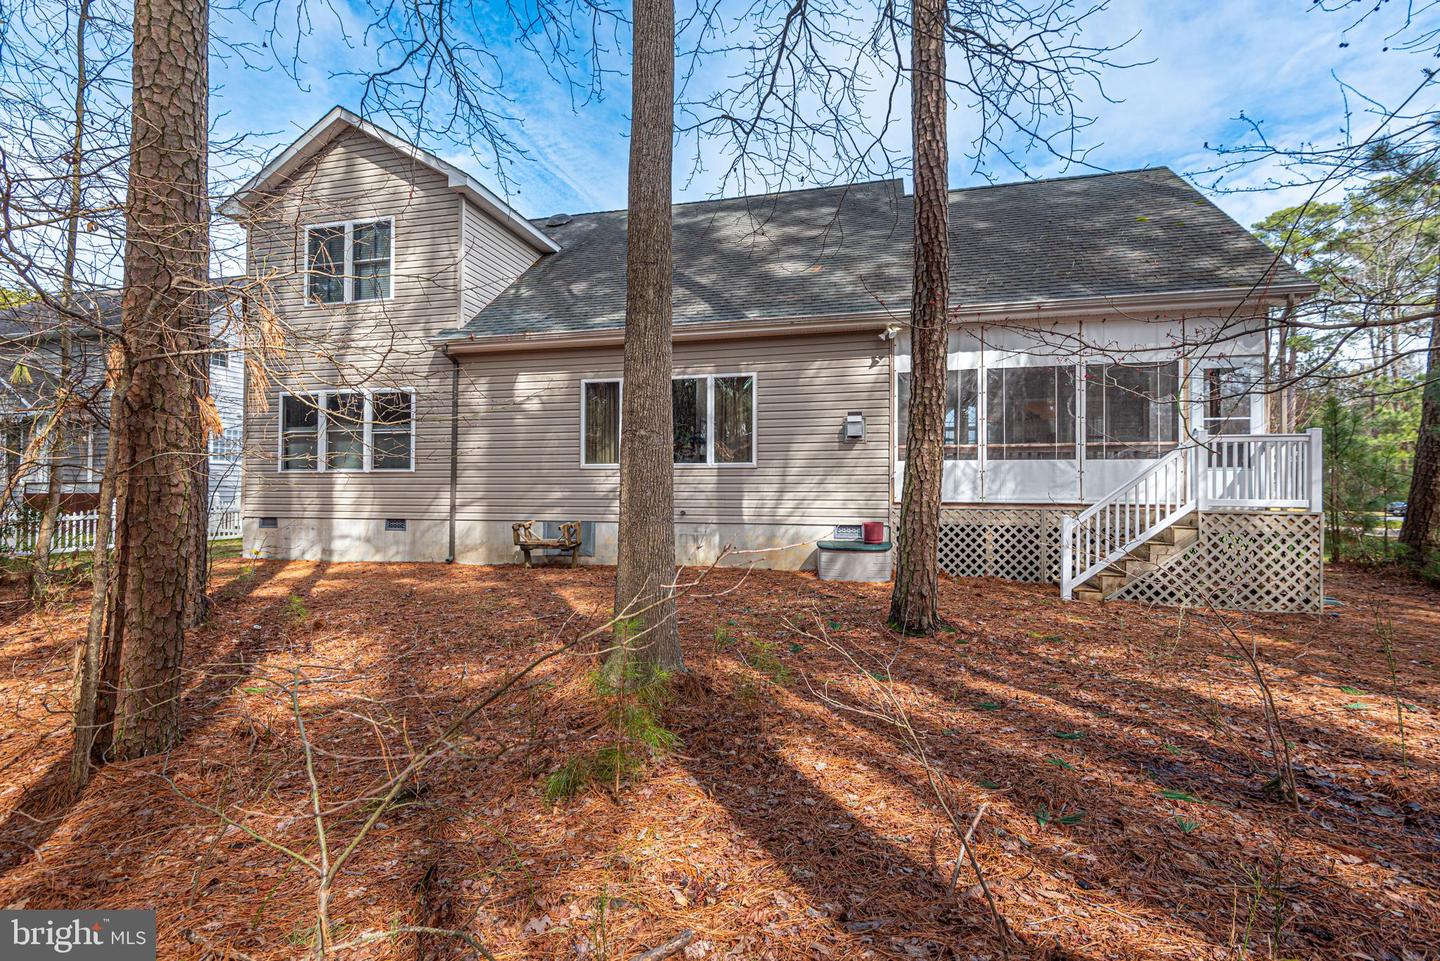 MDWO2019426-802904008008-2024-03-08-00-14-48 106 Pine Forest Dr | Berlin, MD Real Estate For Sale | MLS# Mdwo2019426  - 1st Choice Properties